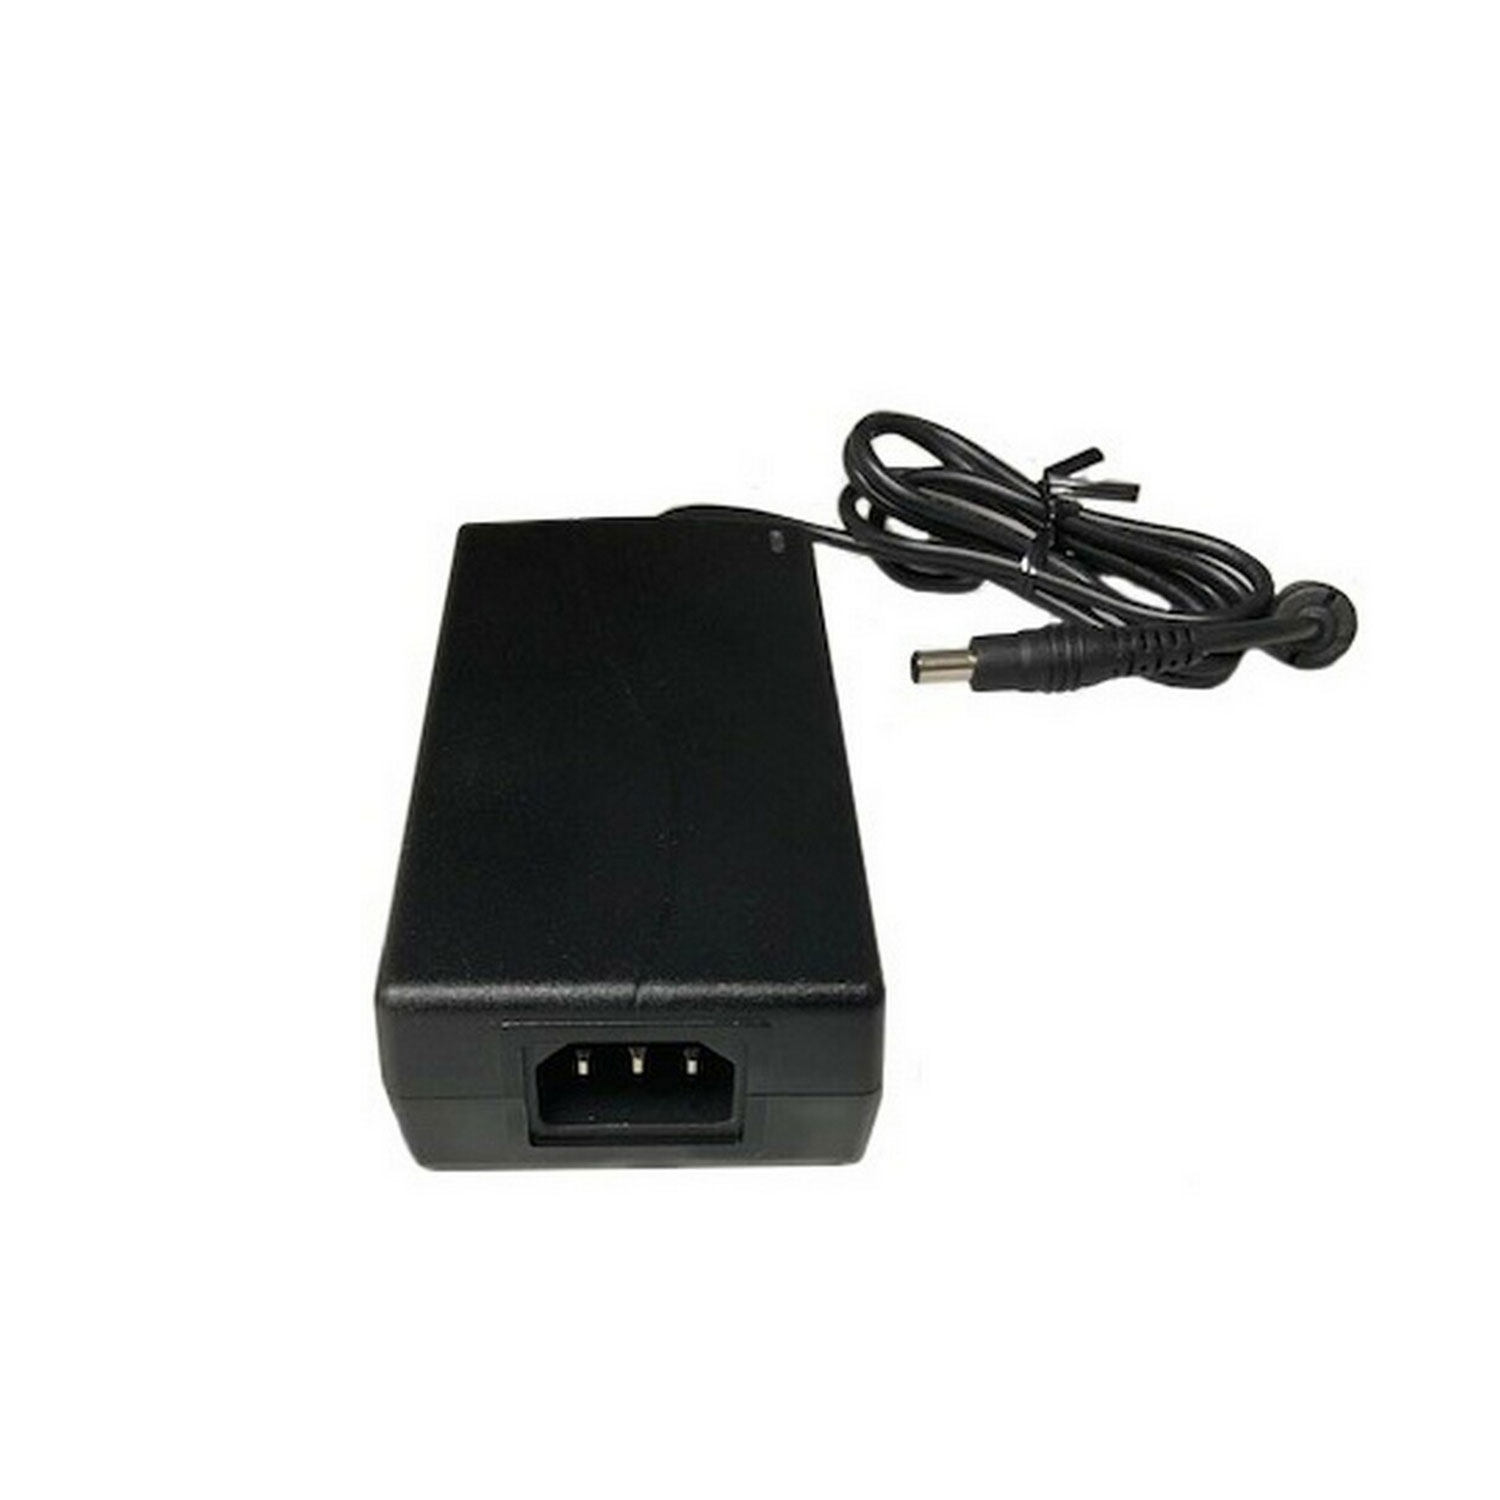 AVer COMPWREVC Power Adapter and Cord for CAM540 CAM520 CAM530 VC520 